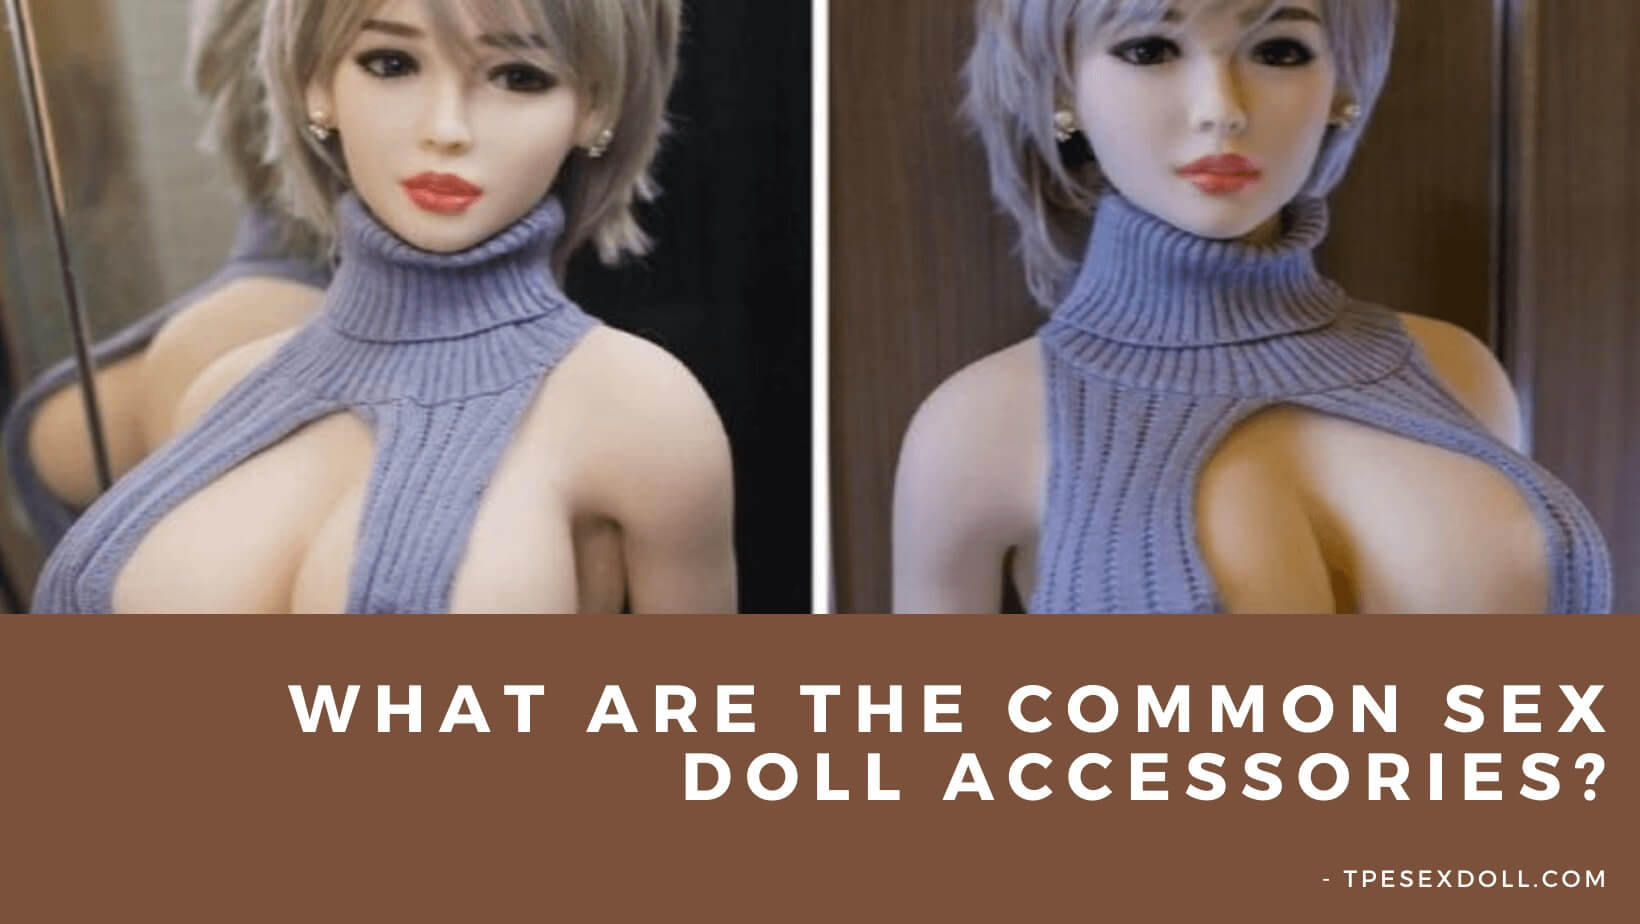 What are the common sex doll accessories?